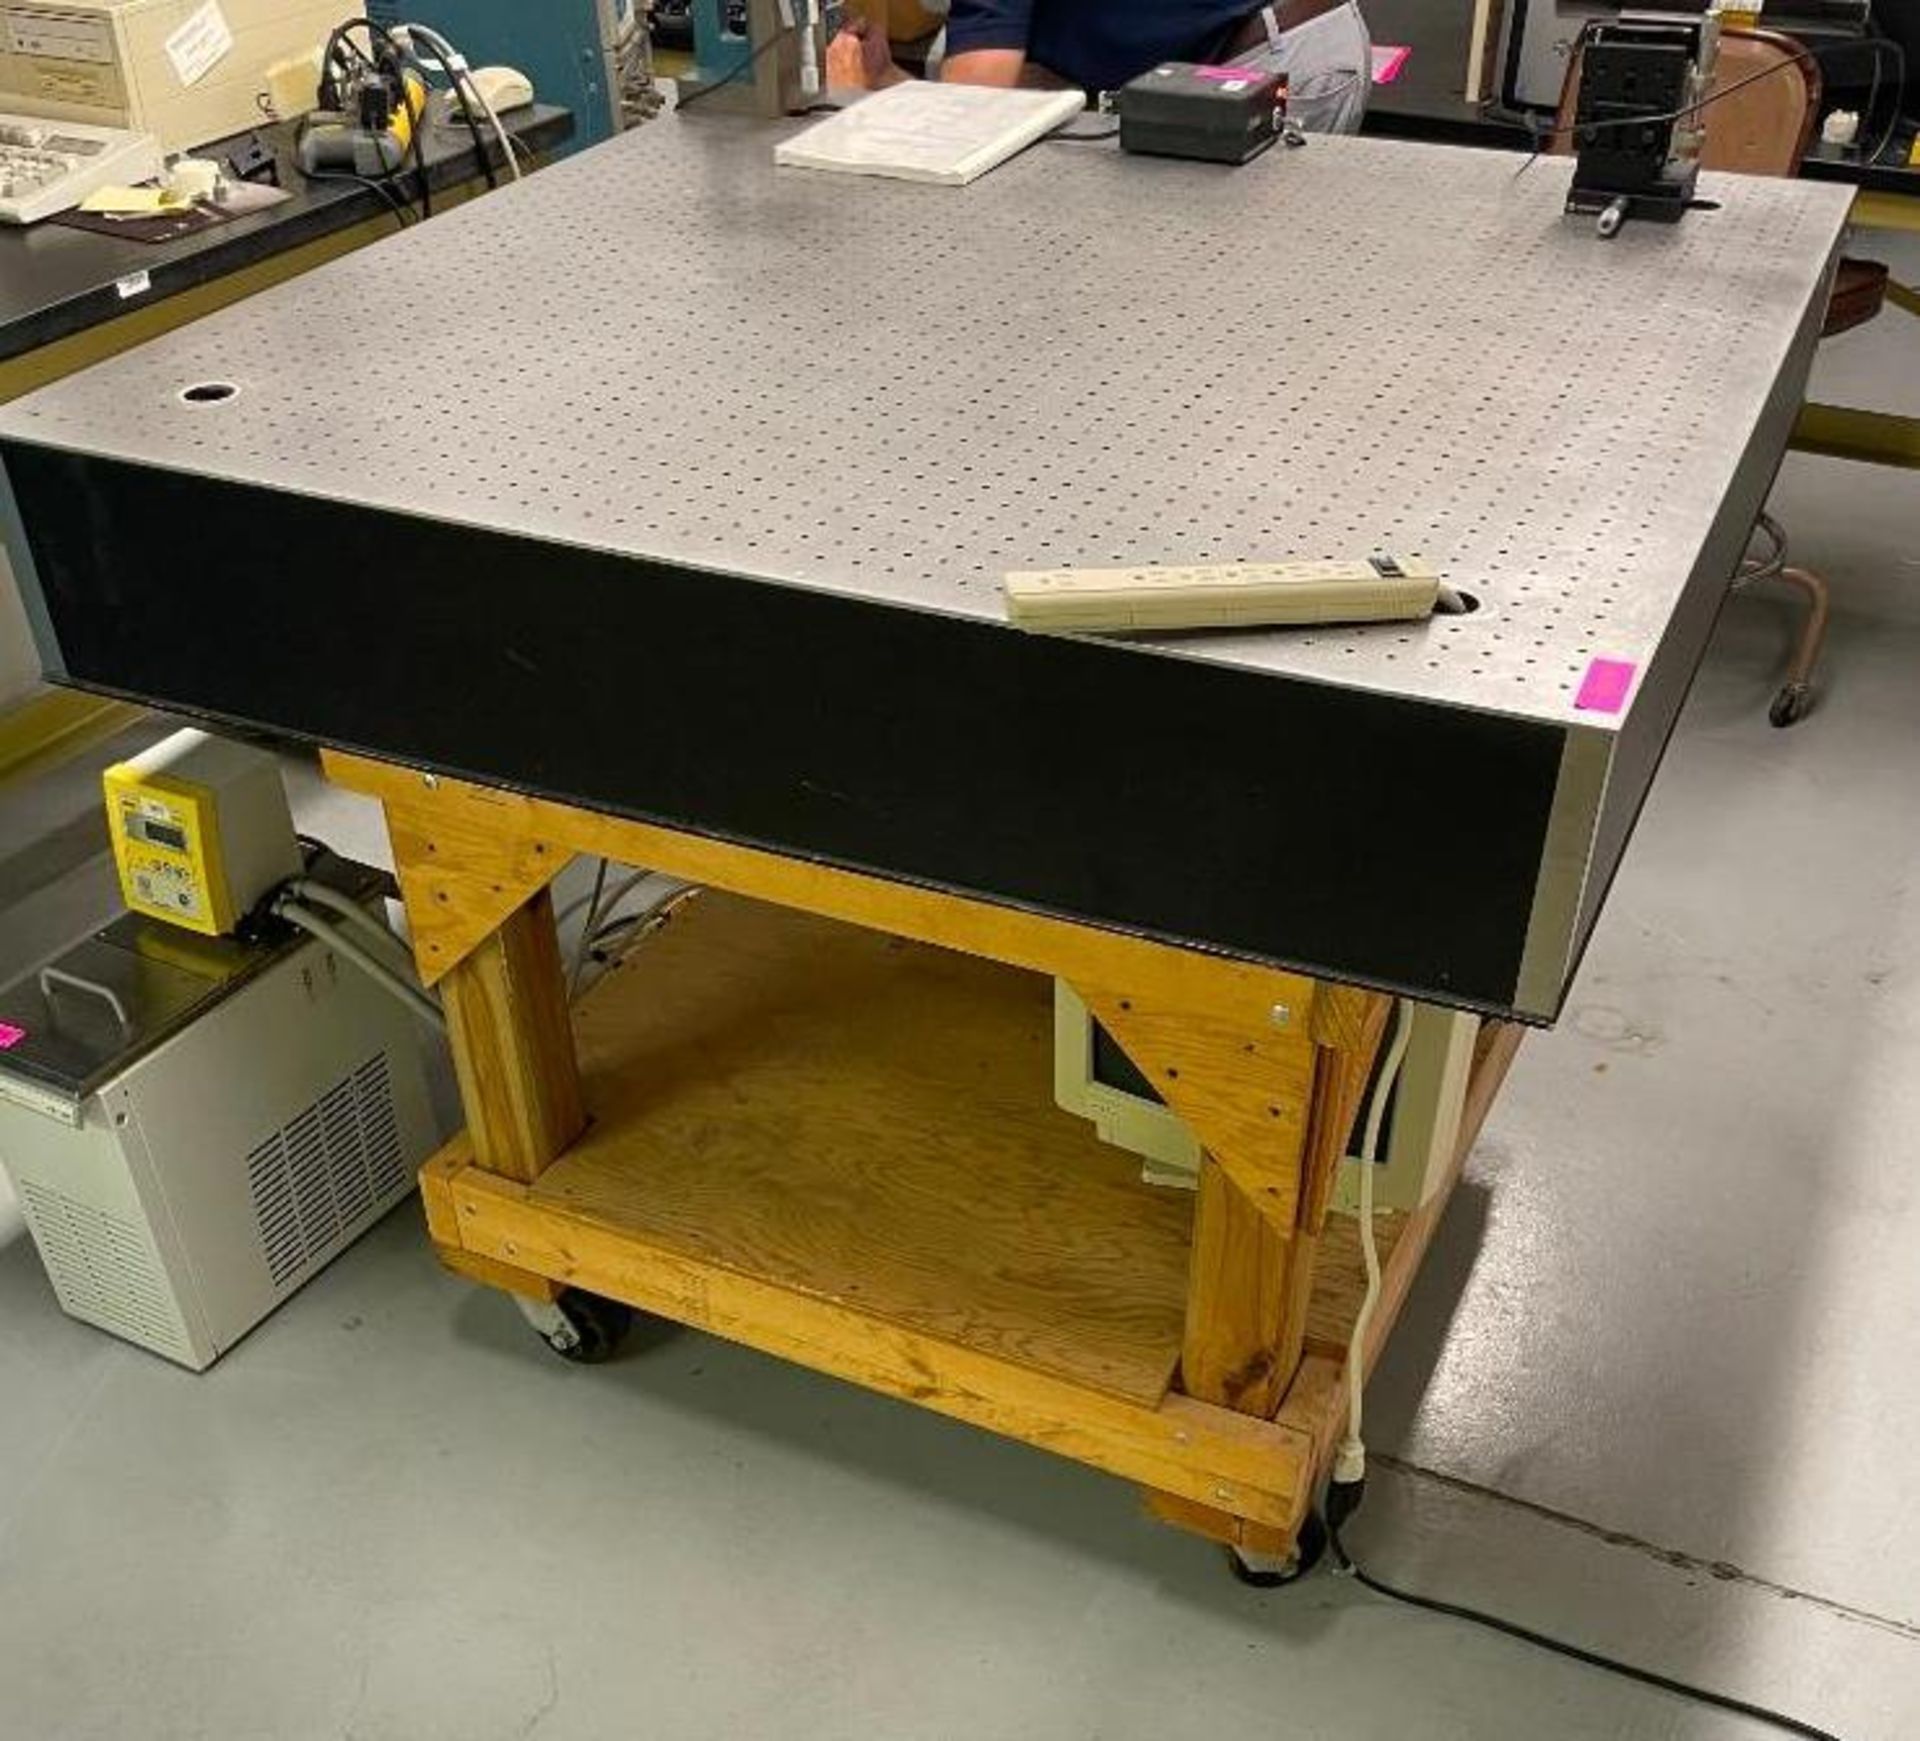 NRC LASER OPTICAL VIBRATION ISOLATION TABLE ON WOOD BASE WITH CASTERS BRAND/MODEL: NEWPORT INFORMATI